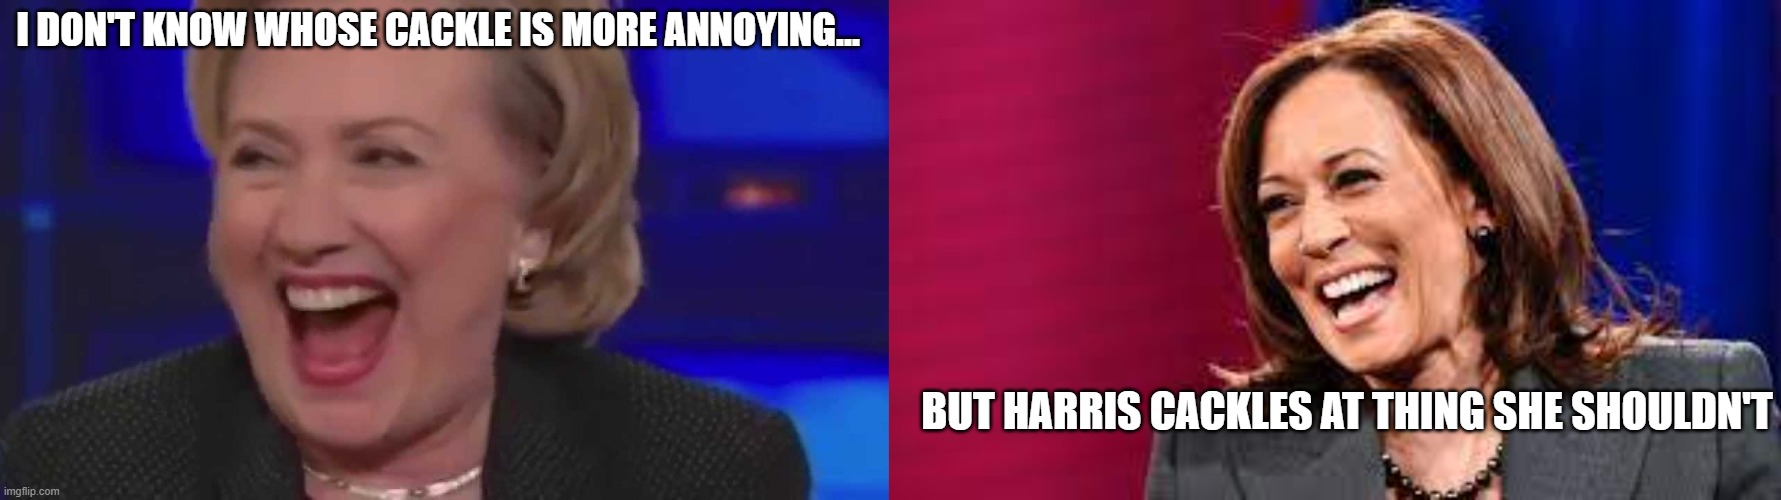 Cackling Clinton and Harris | I DON'T KNOW WHOSE CACKLE IS MORE ANNOYING... BUT HARRIS CACKLES AT THING SHE SHOULDN'T | image tagged in annoying,cackle,inappropriate laughing,please make it stop,politics | made w/ Imgflip meme maker